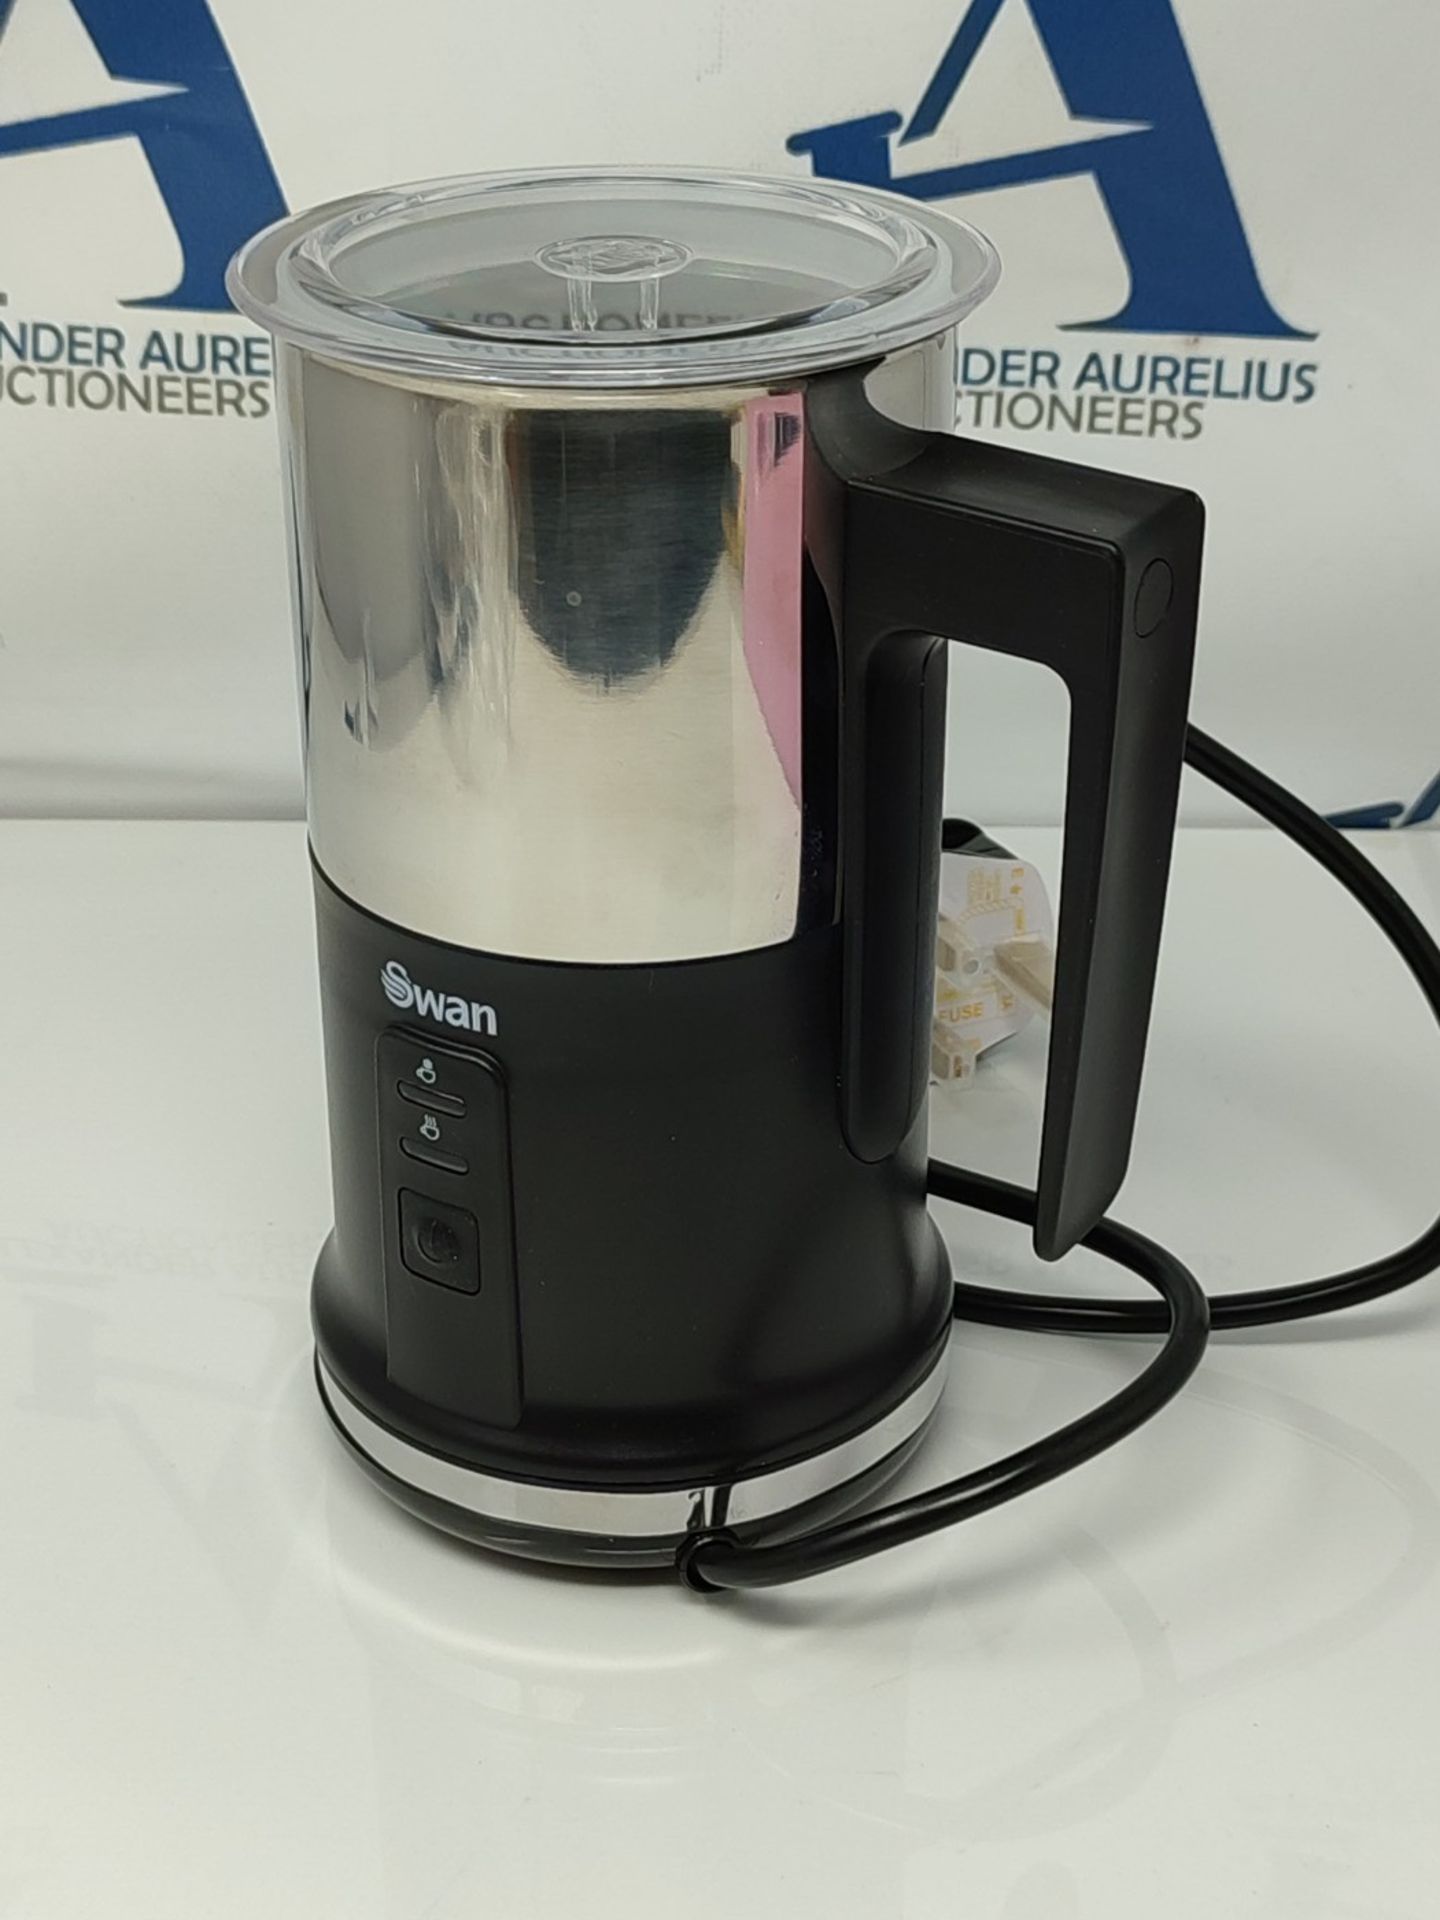 Swan, Automatic Milk Frother and Warmer, 2 Layer Non-Stick Coating, 500W, 500 W, Black - Image 3 of 3